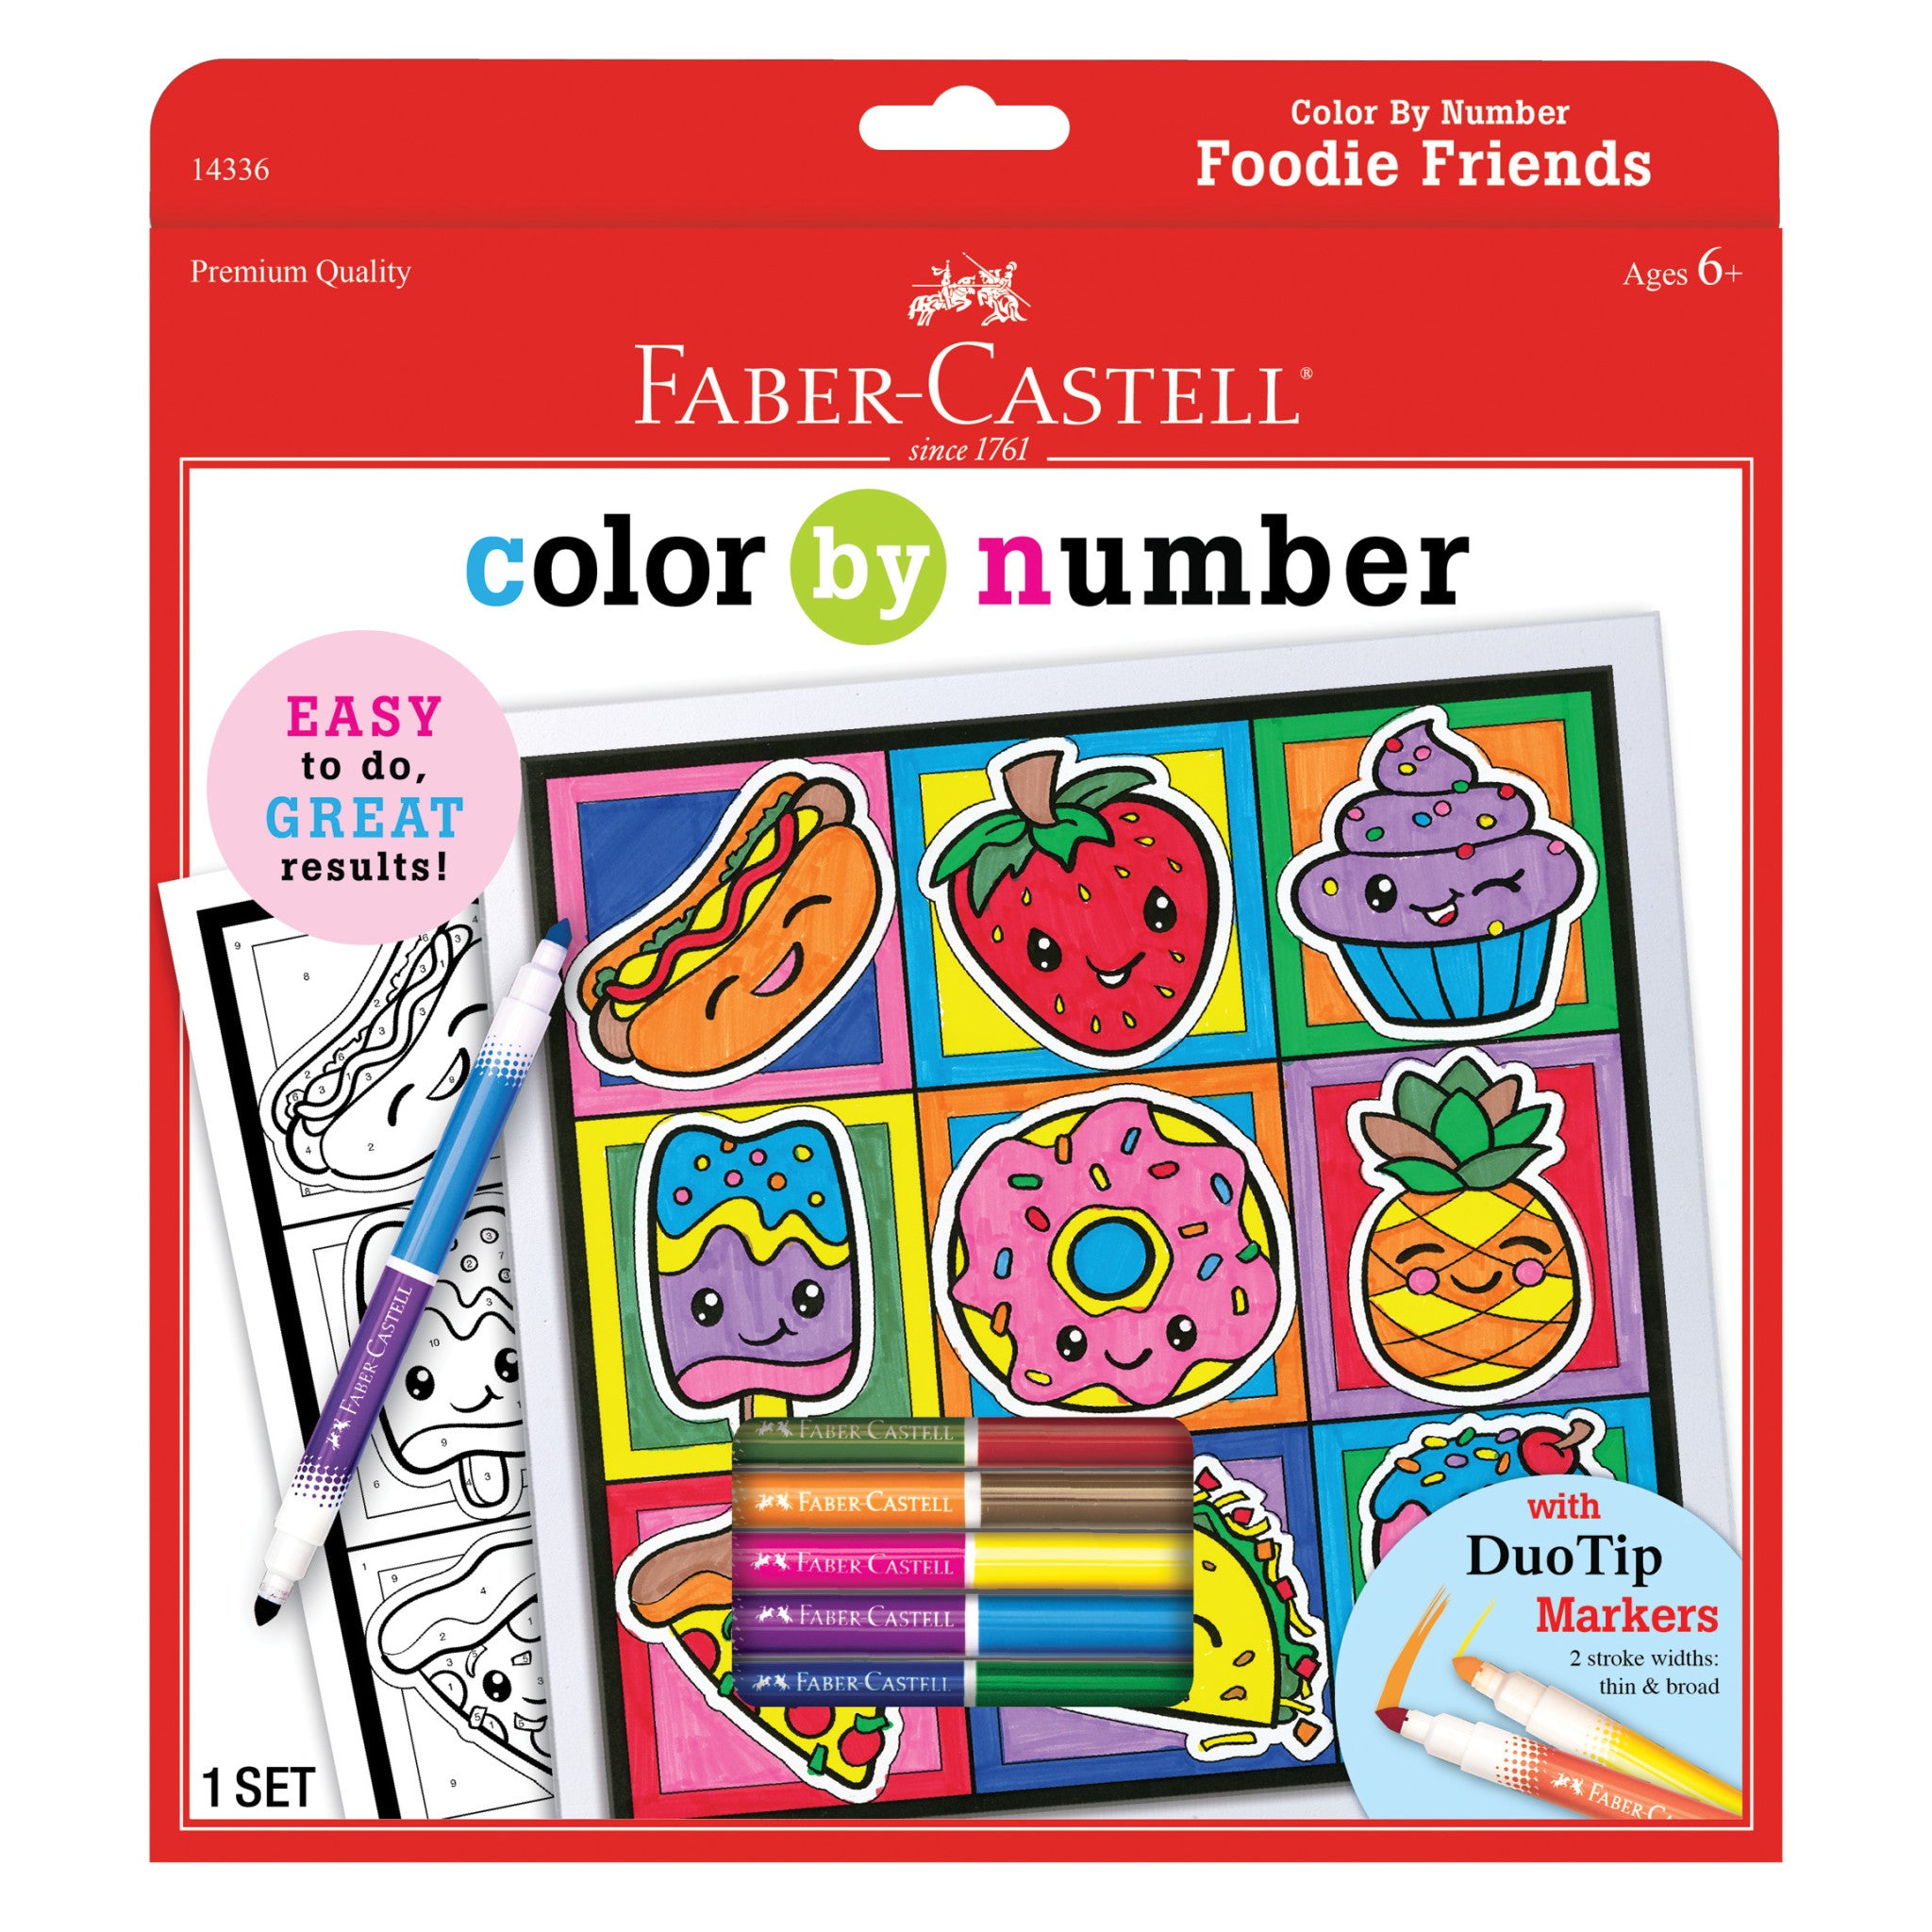 Faber Castell Color by Number Foodie Friends